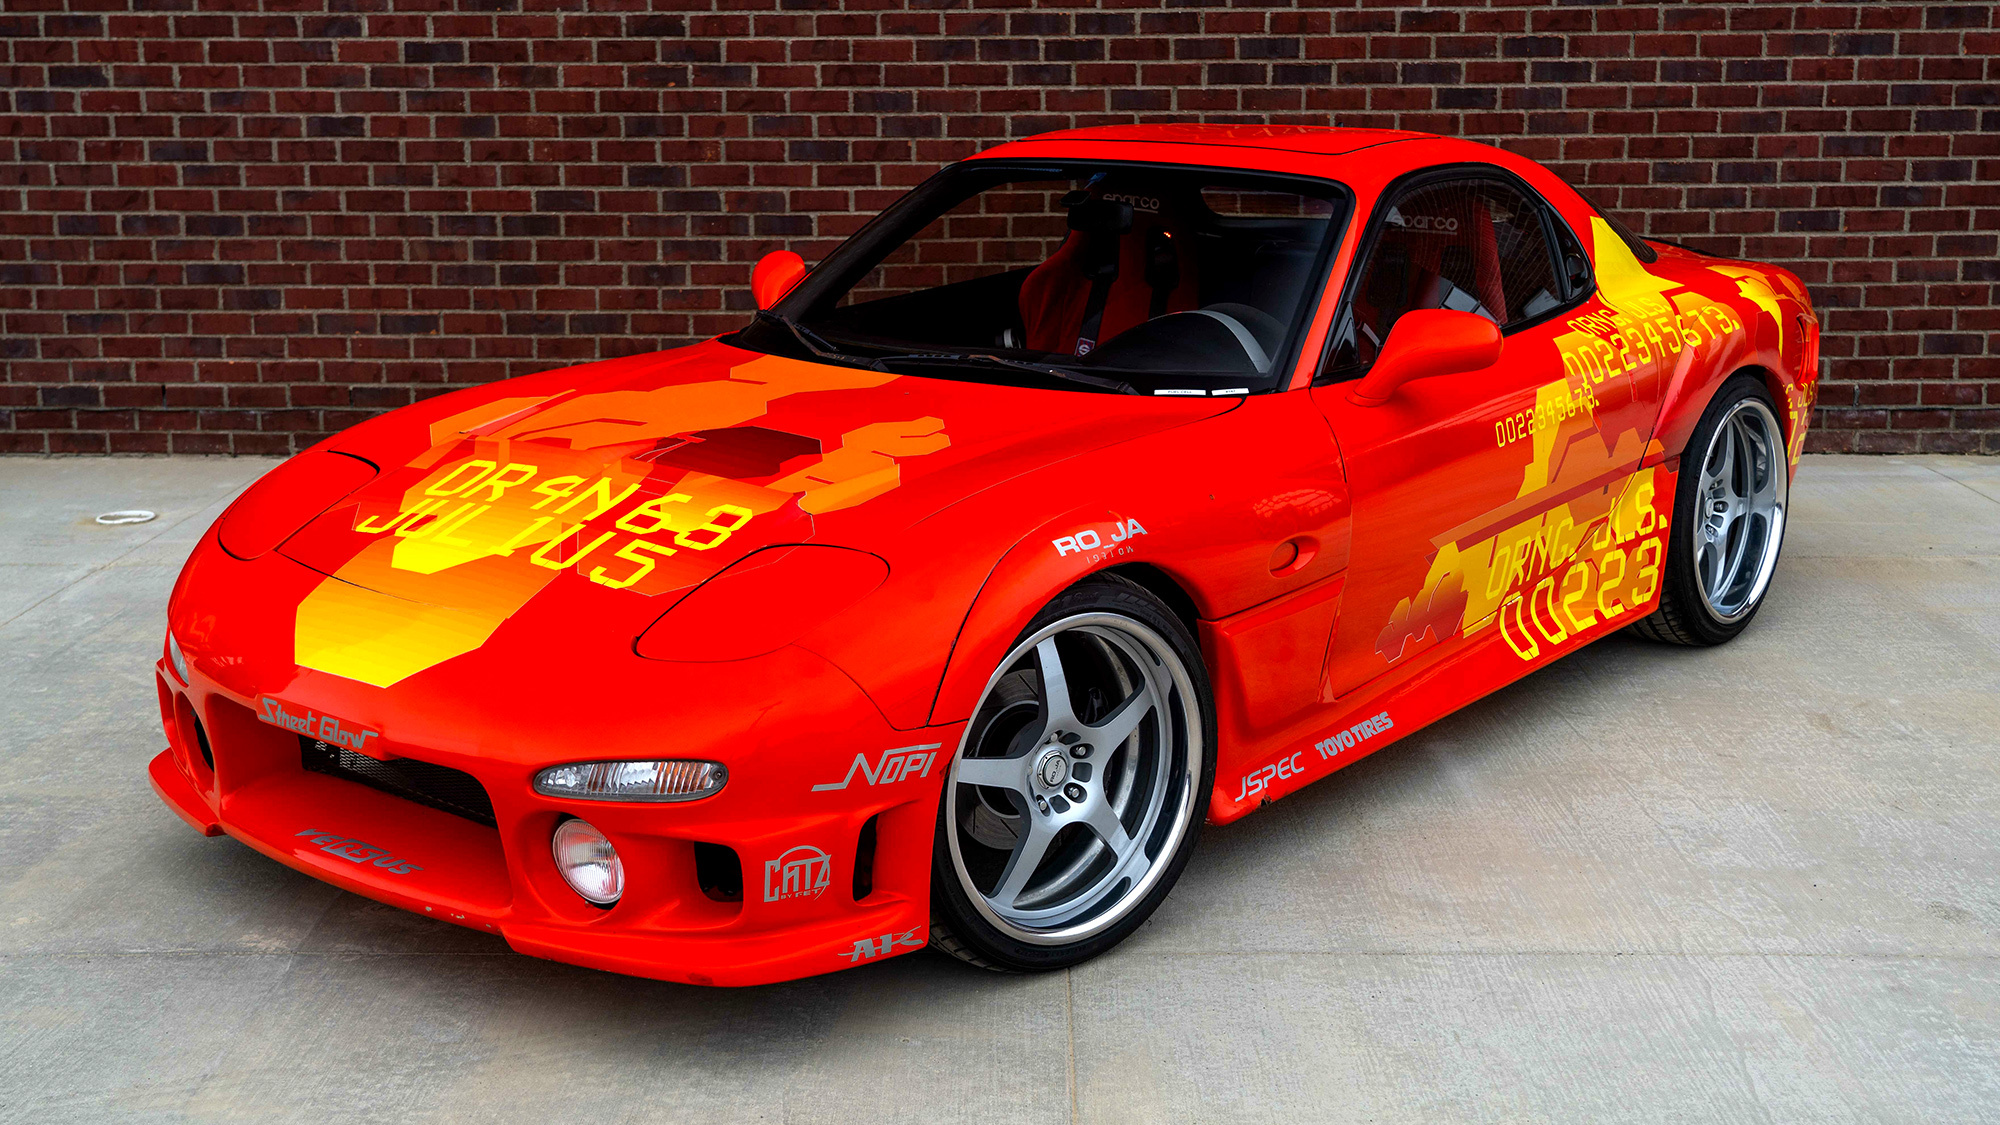 Get Fast & Furious With Dominic Toretto's Mazda FD RX-7